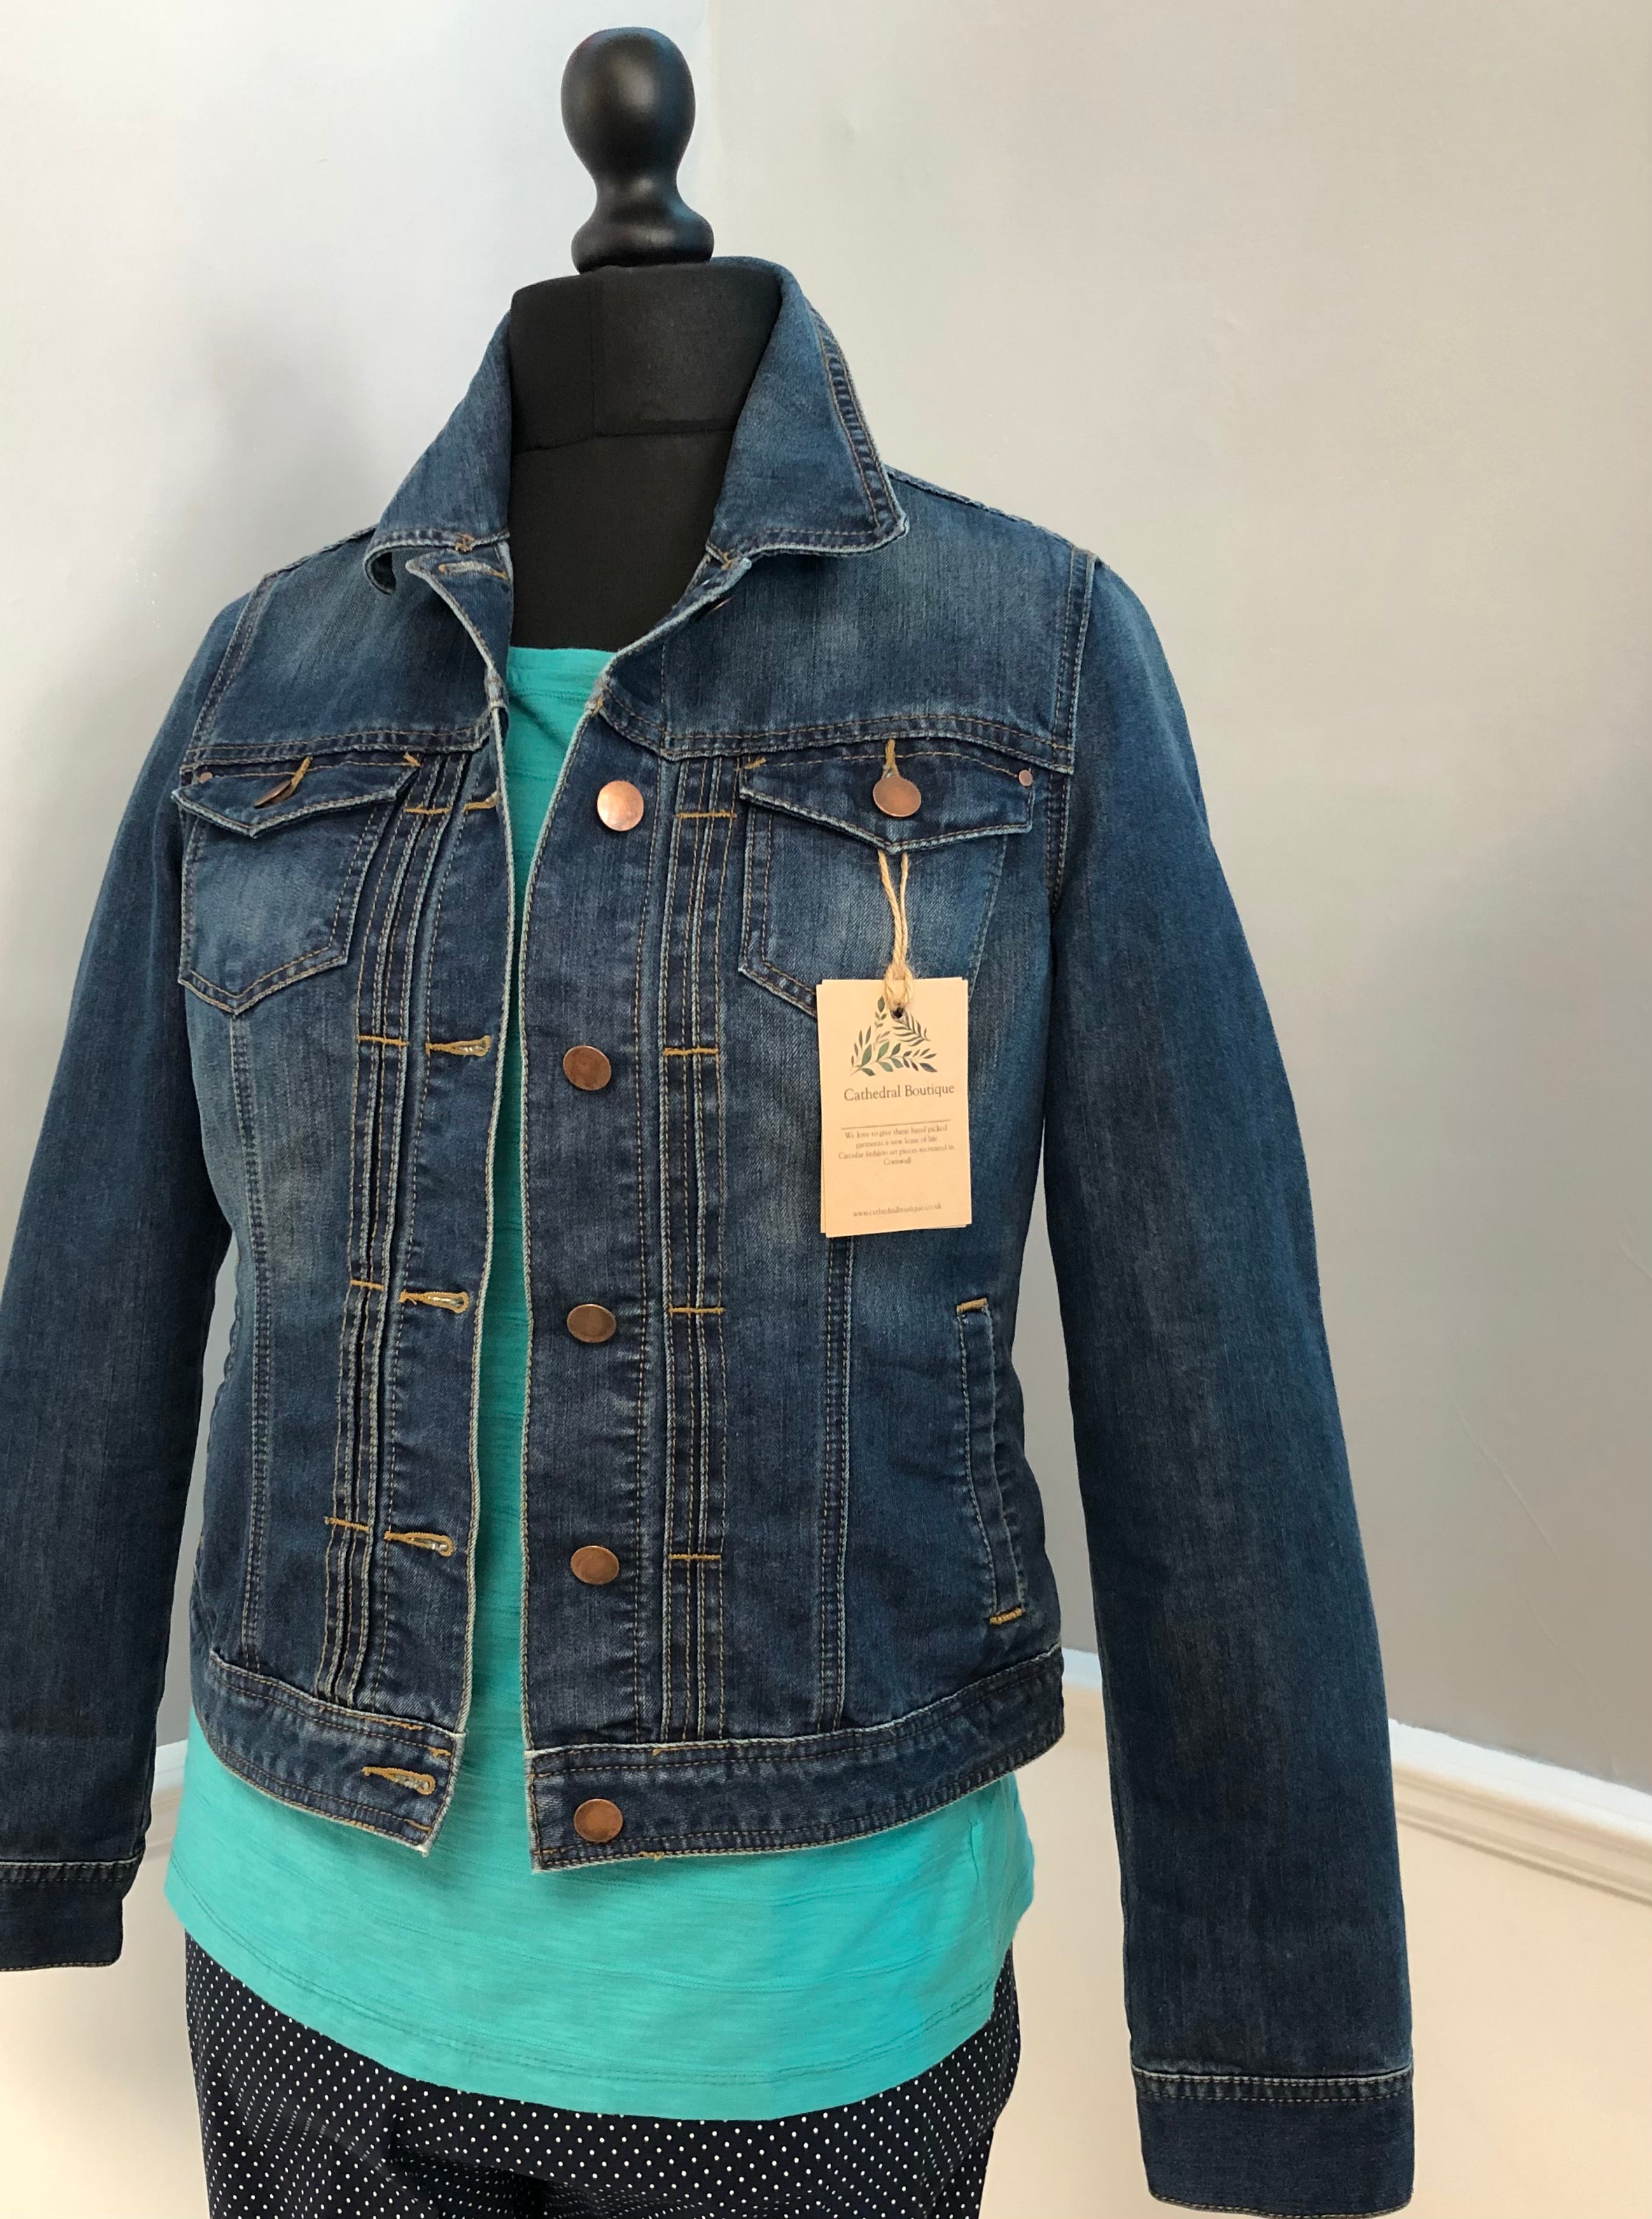 Re-Styled Denim Jacket by Trish (hand painted peacock)